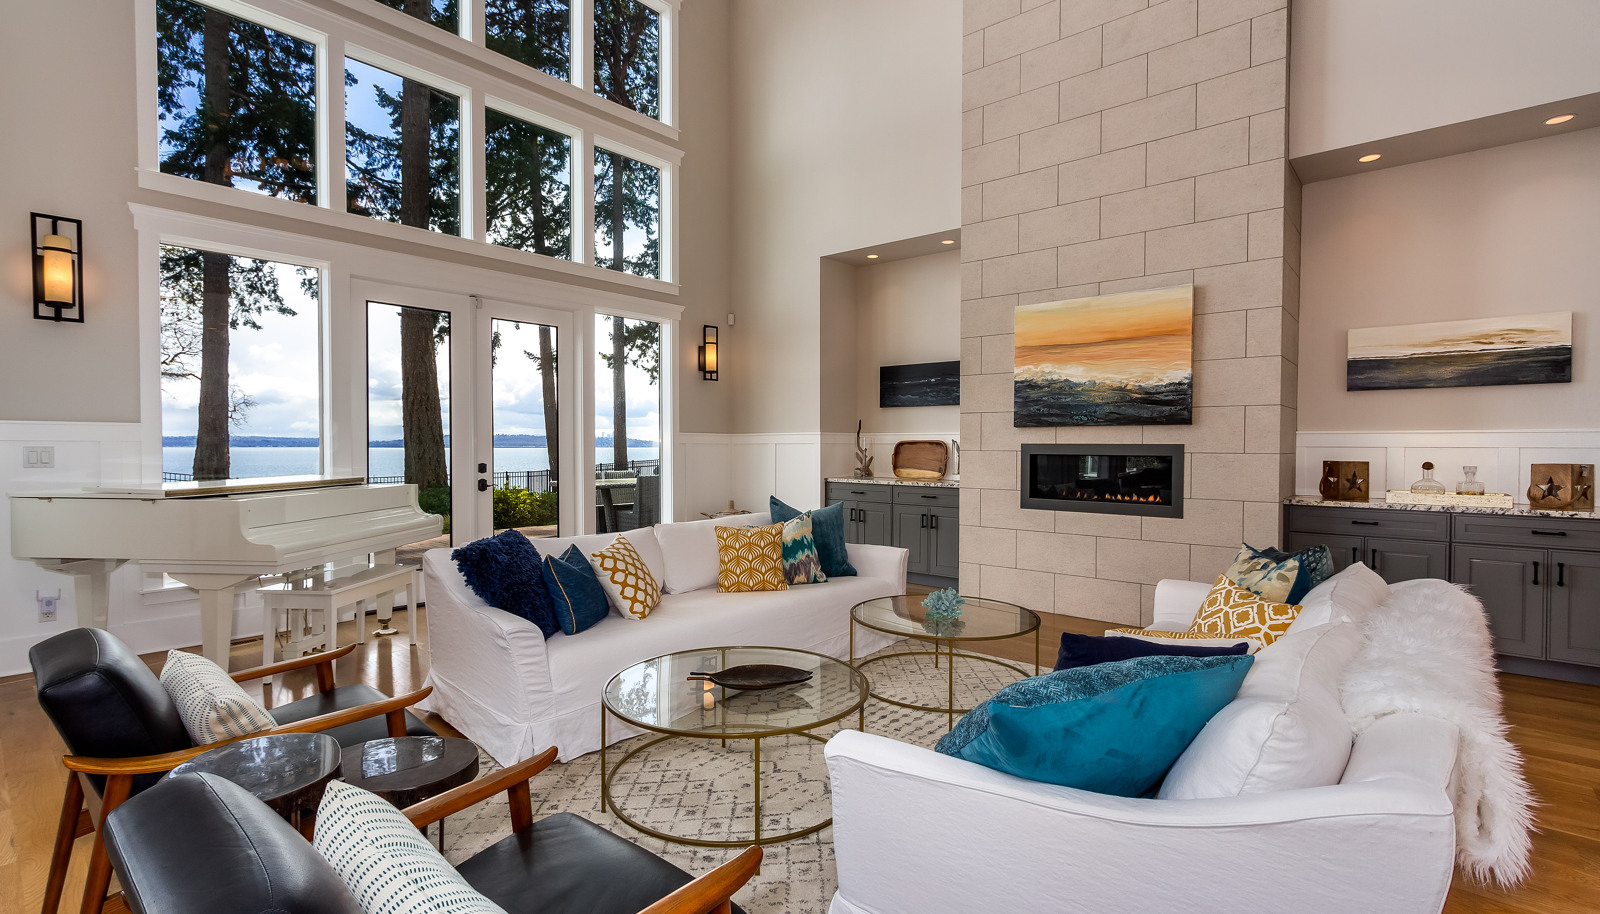 Grand living room, soaring windows and views as far as your eyes can see. Conversations stay cozy by the fireplace. Incredible.